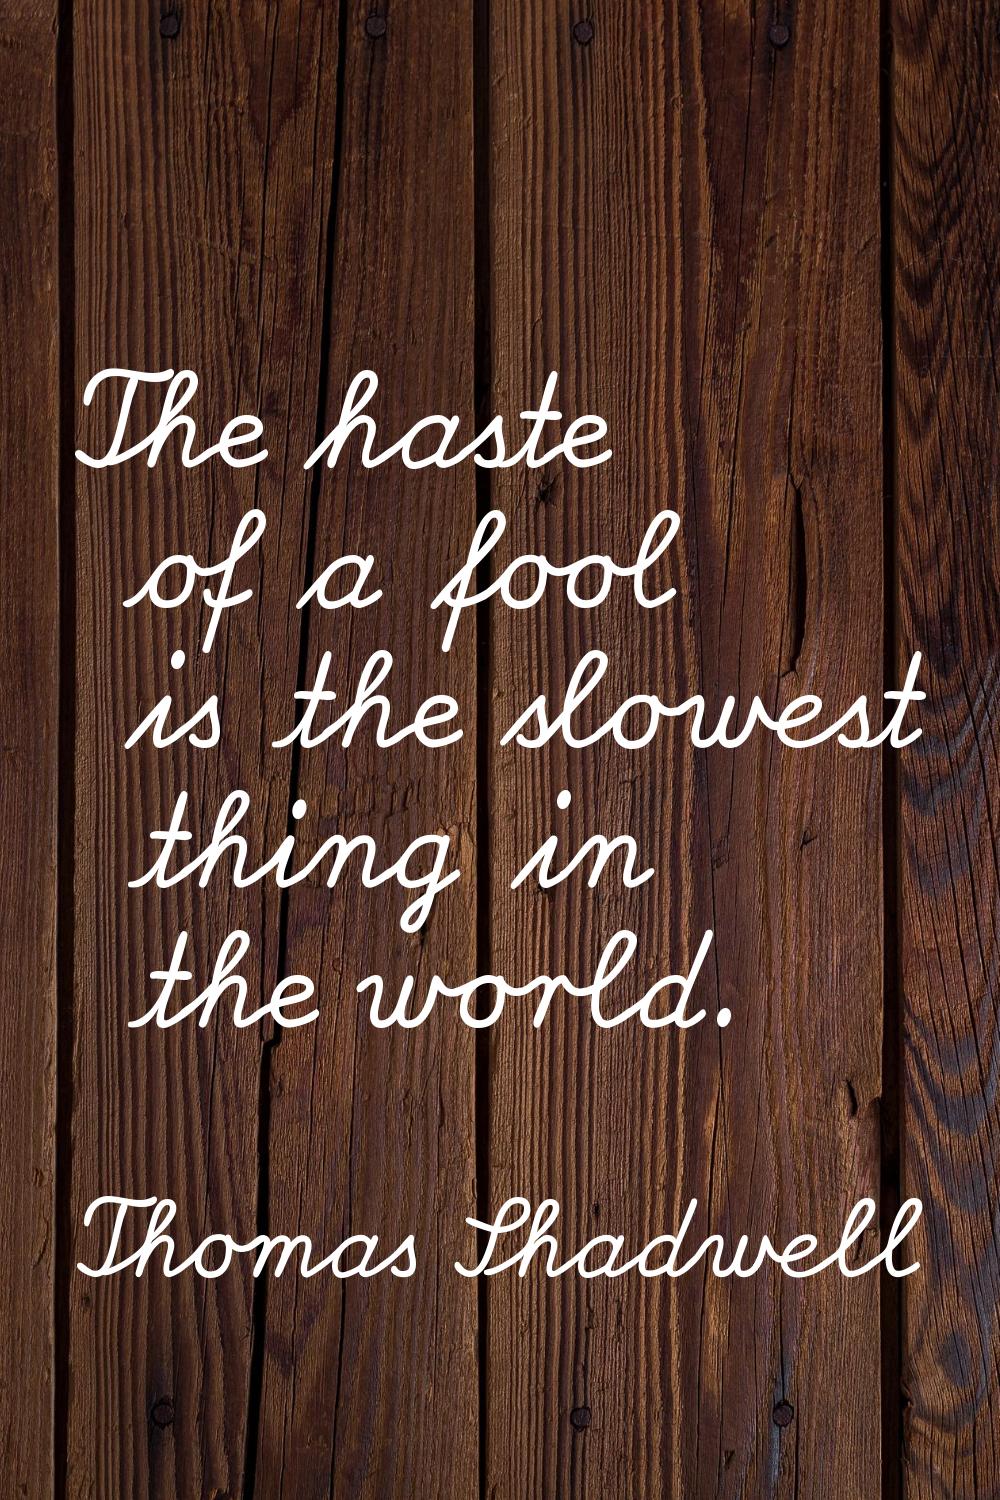 The haste of a fool is the slowest thing in the world.